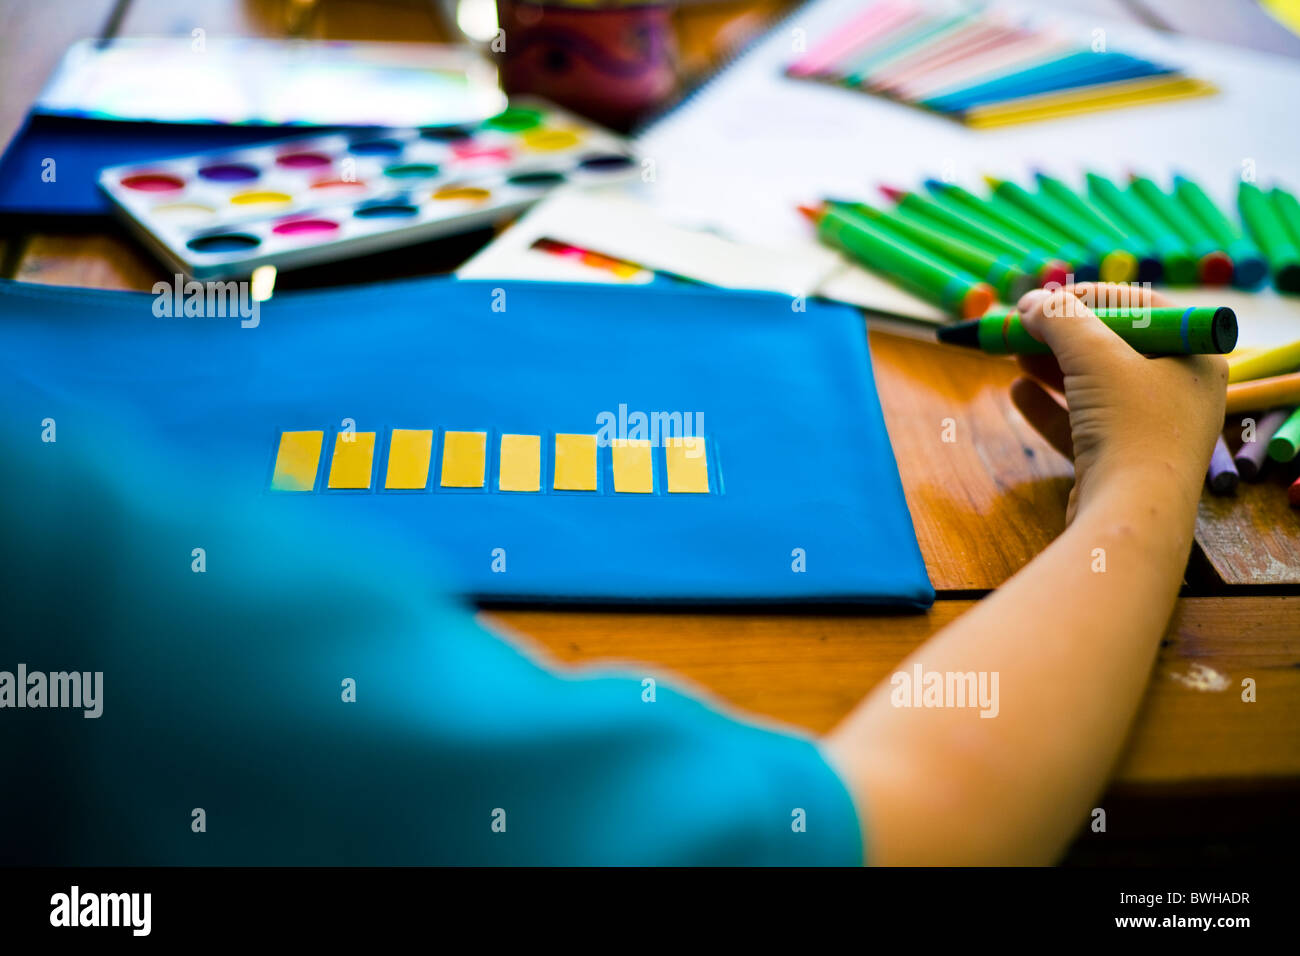 Young child holding a crayon about to write on his pencil case stationary paint pencils and crayons in background Stock Photo